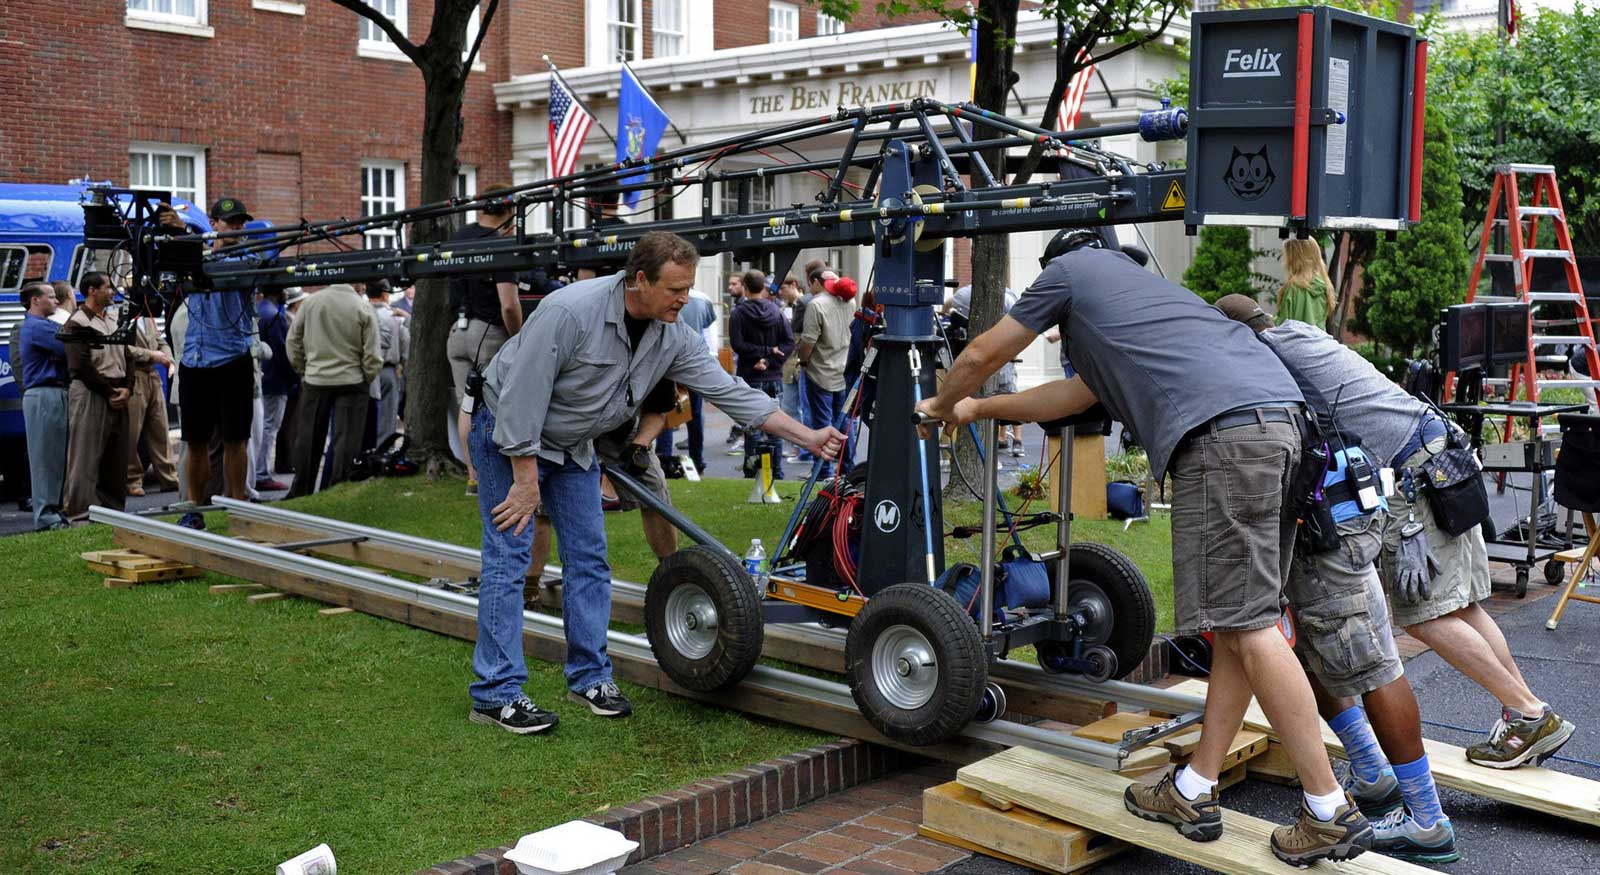 Shooting Schedule Pro Tips for a 10-Page Shoot Day - 2. Enlist film crew setup scene